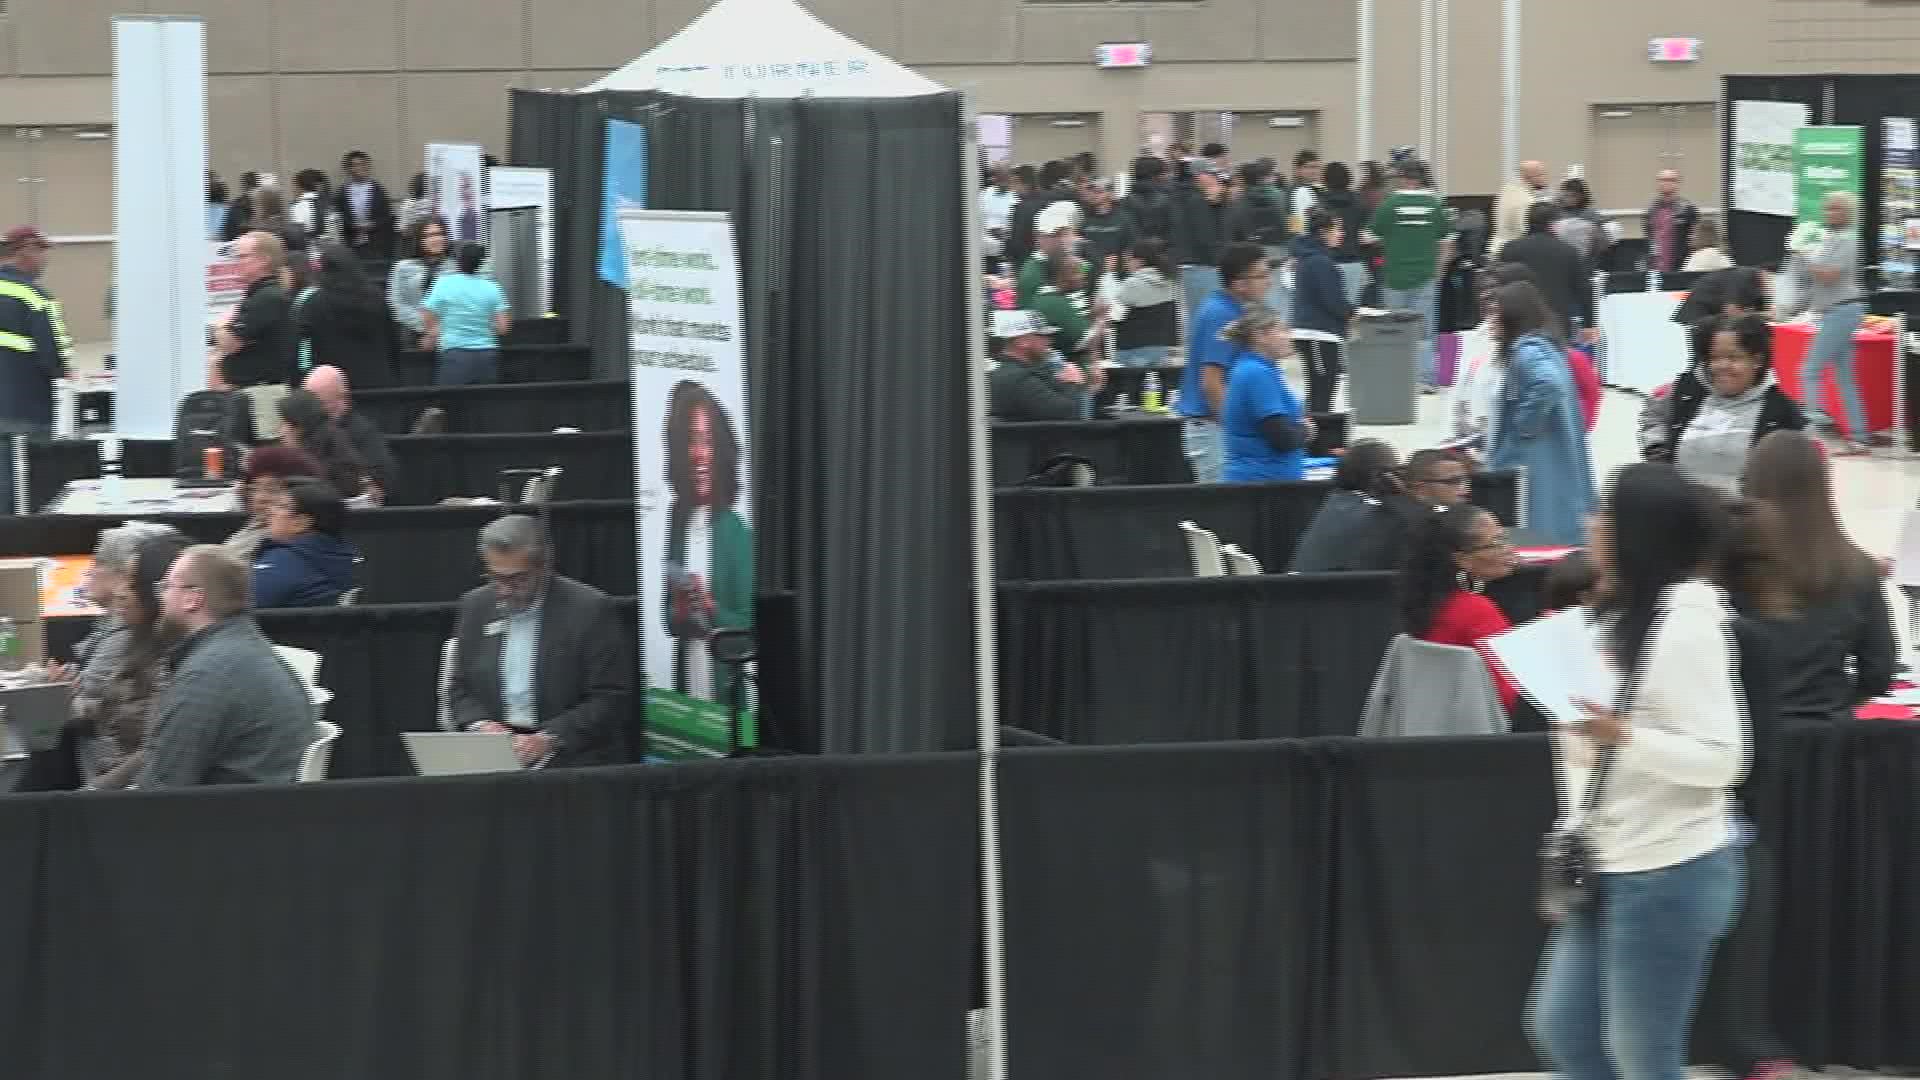 There were at least 75 different businesses represented at the job fair, with a wide range of different industries.